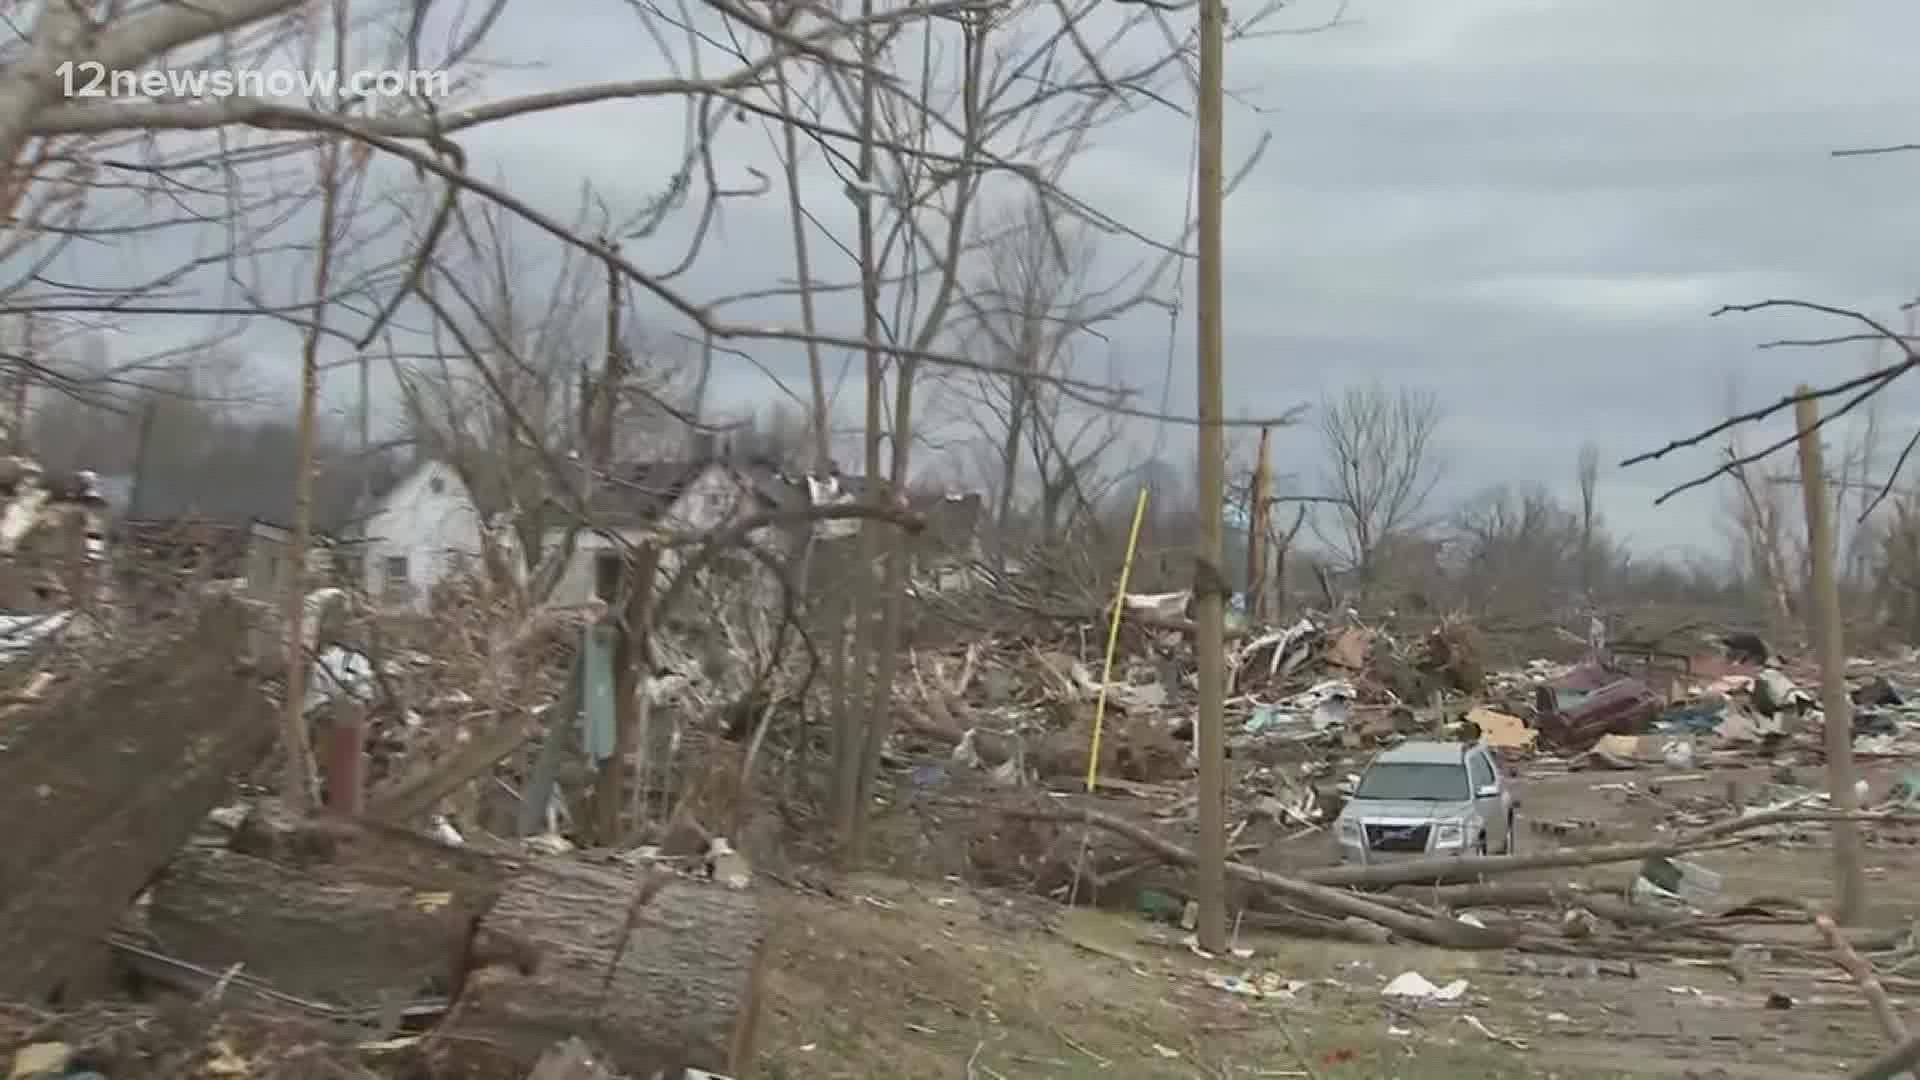 Biden is expected to give news about federal assistance after deadly tornadoes swept through the area.